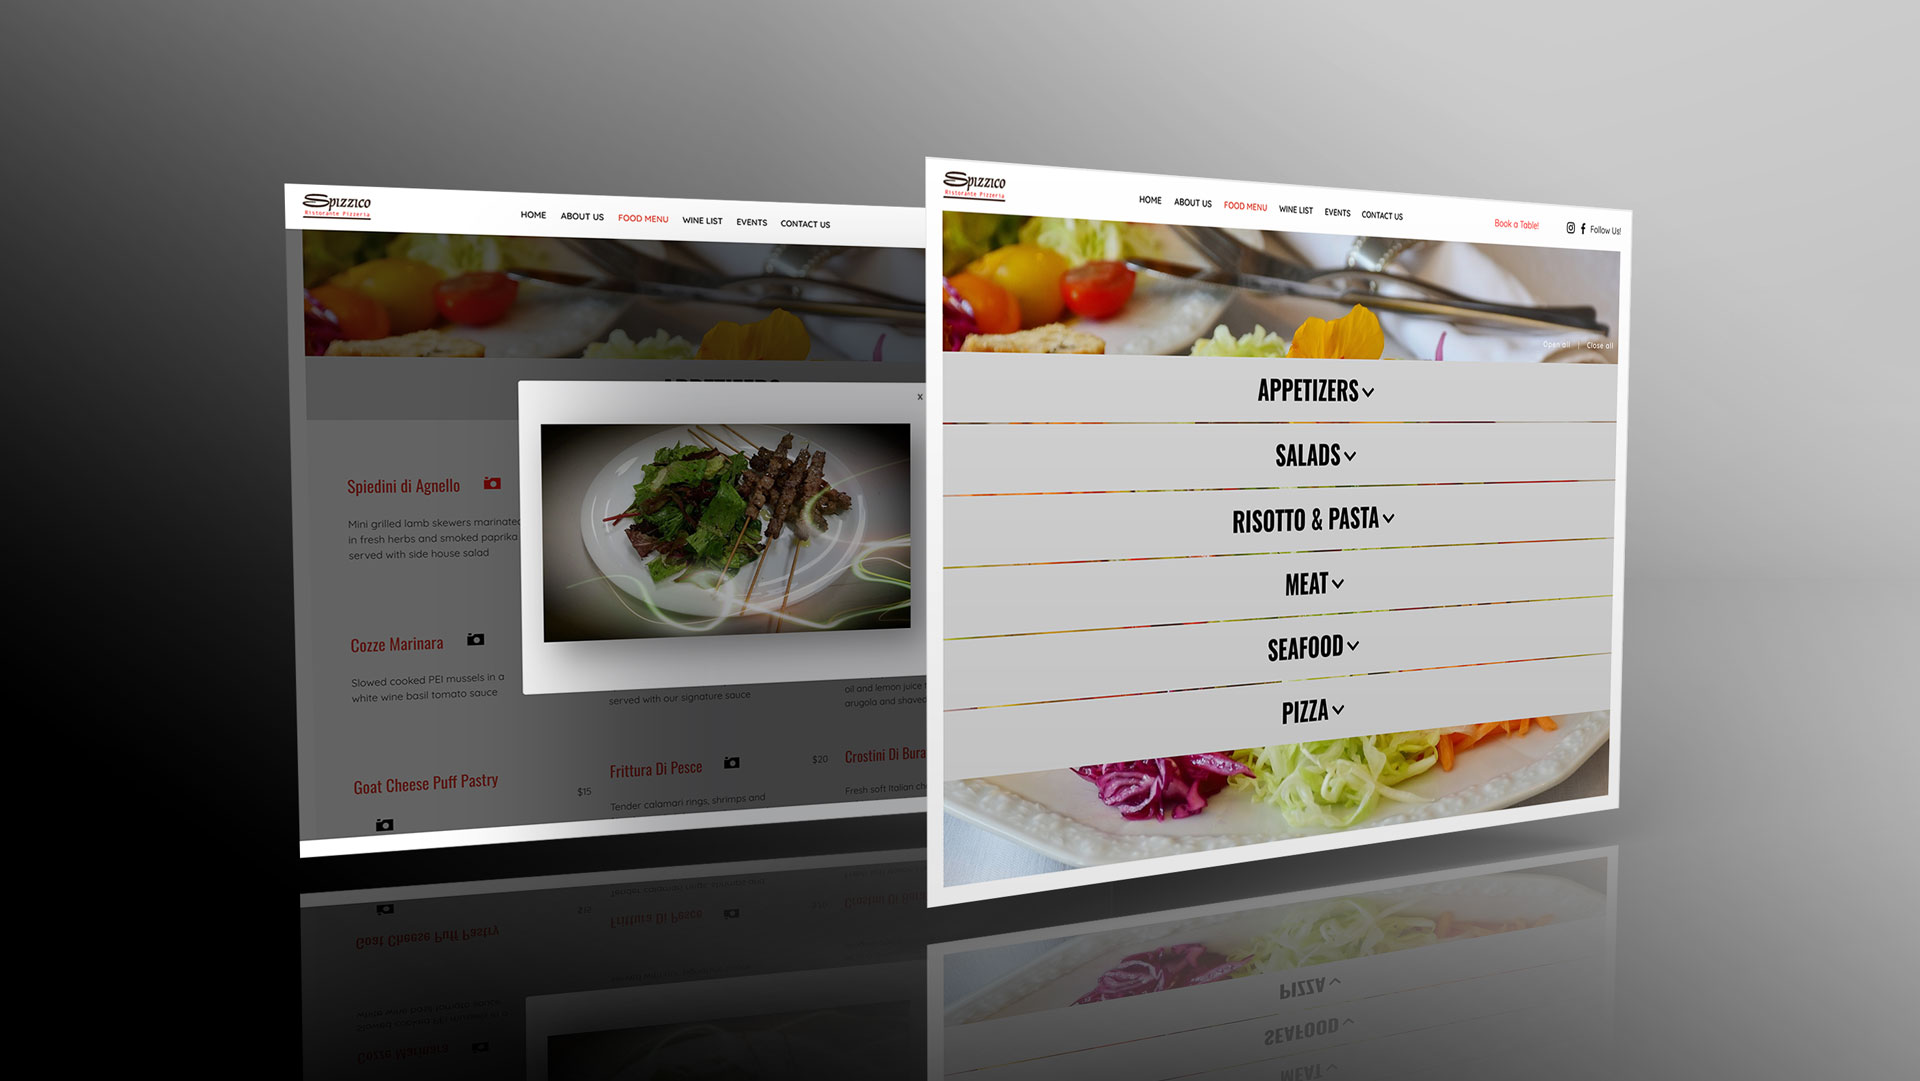 The depiction by PixelUp presents the custom website design of Spizzico Restaurant, emphasizing the 'Food Menu' page and its unique menu elements. Two isometric desktop screens are displayed, focusing particularly on the 'Food Menu' page. The food categories stand out with a solid grey background set against a backdrop of a vegetable salad image. Spizzico Restaurant's custom website design is as one of PixelUp's projects.